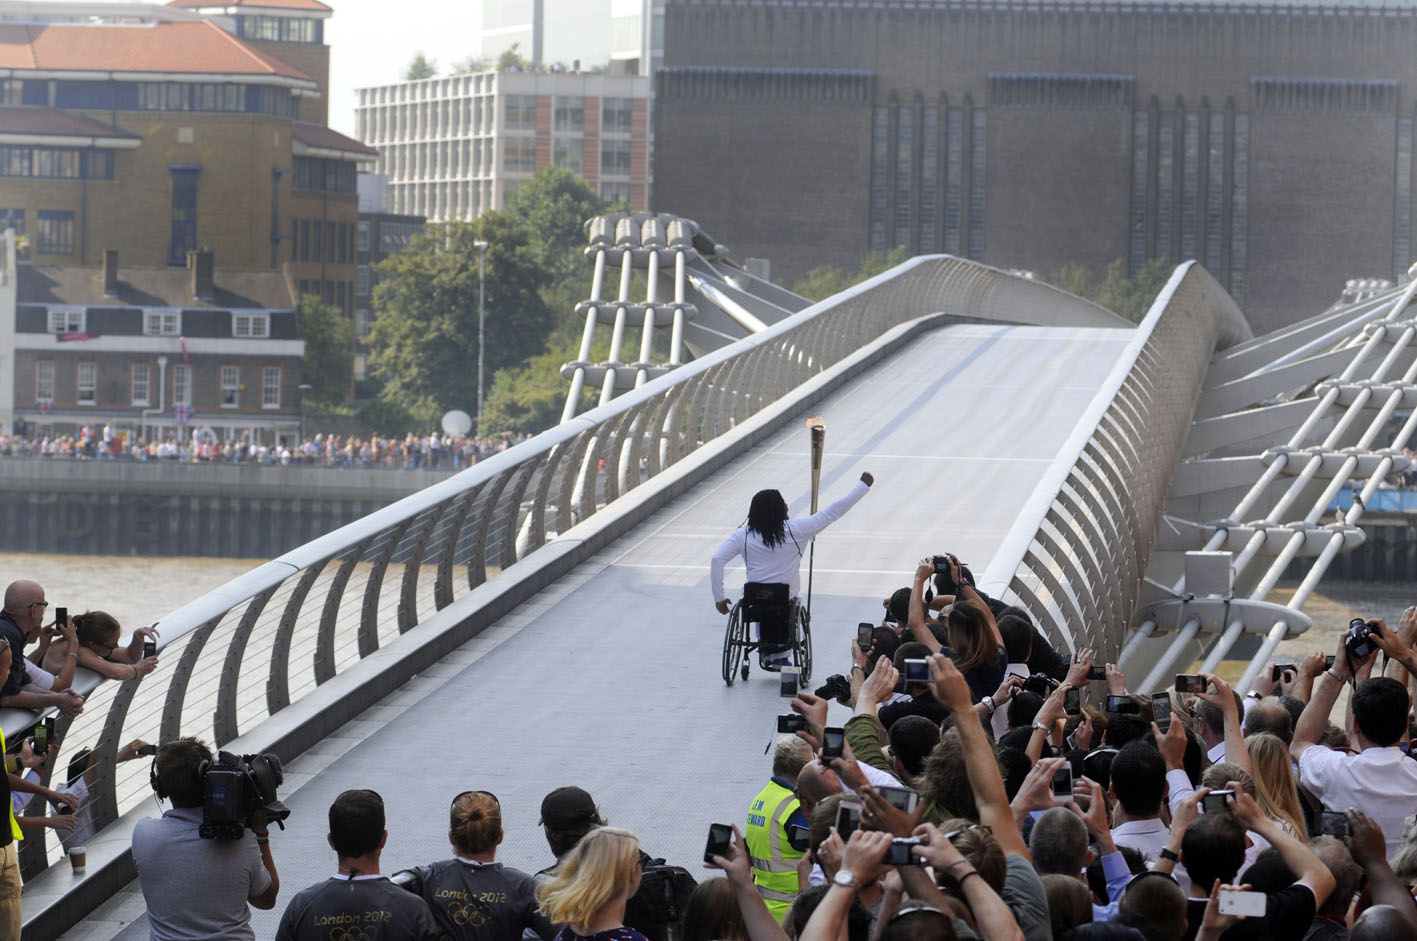 Enthusiastic crowds greet the Olympic Torch Relay as a new torch bearer  sets off across the Millennium Bridge across the River Thames to south London. On the other side another huge crowd can be seen waiting to greet him.Â© Stefano Cagnoni - reportdigital.co.uk01789 262151 07831 121483info@reportdigital.co.ukwww.reportdigital.co.ukNUJ recommended terms & conditions apply. Moral rights asserted under Copyright Designs & Patents Act 1988. No part of this photo to be stored, reproduced, manipulated or transmitted by any means without permission.